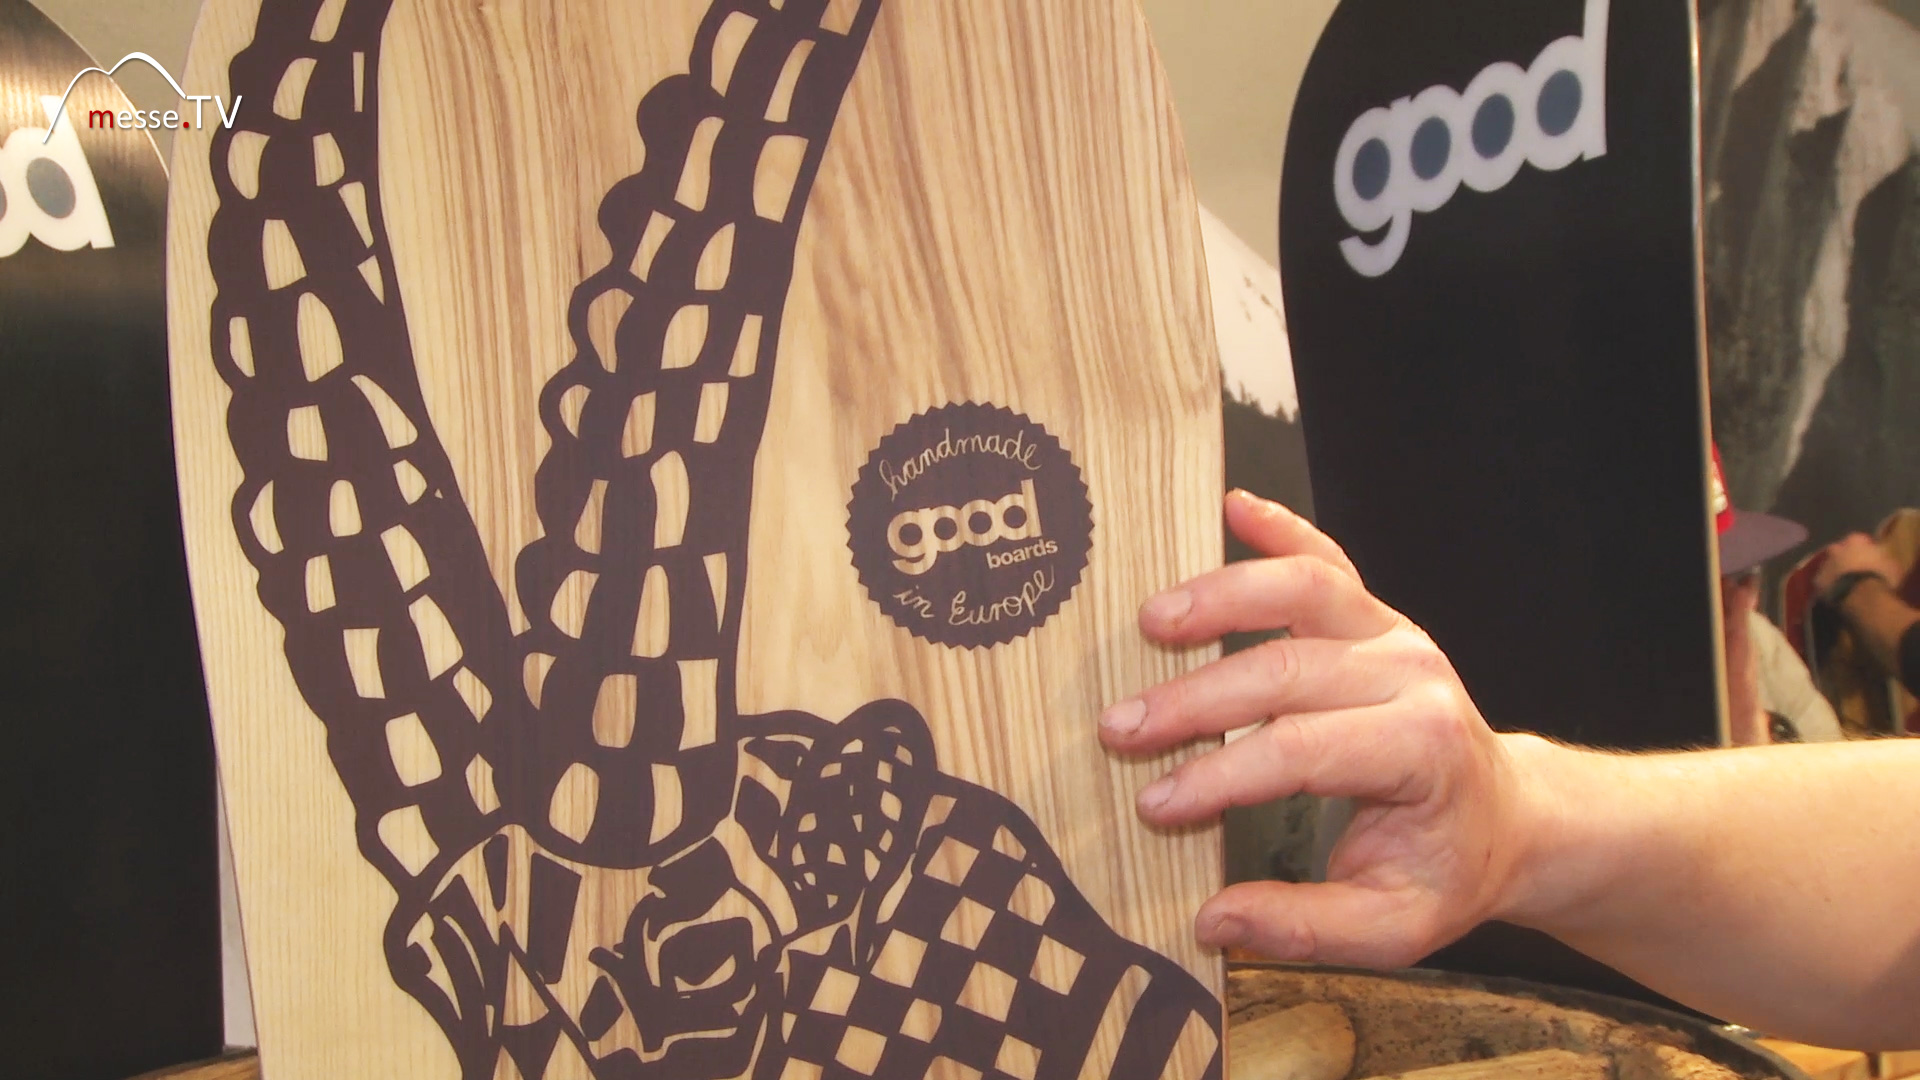 Good Boards Wood Snowboard with Ibex Motif Ispo 2017